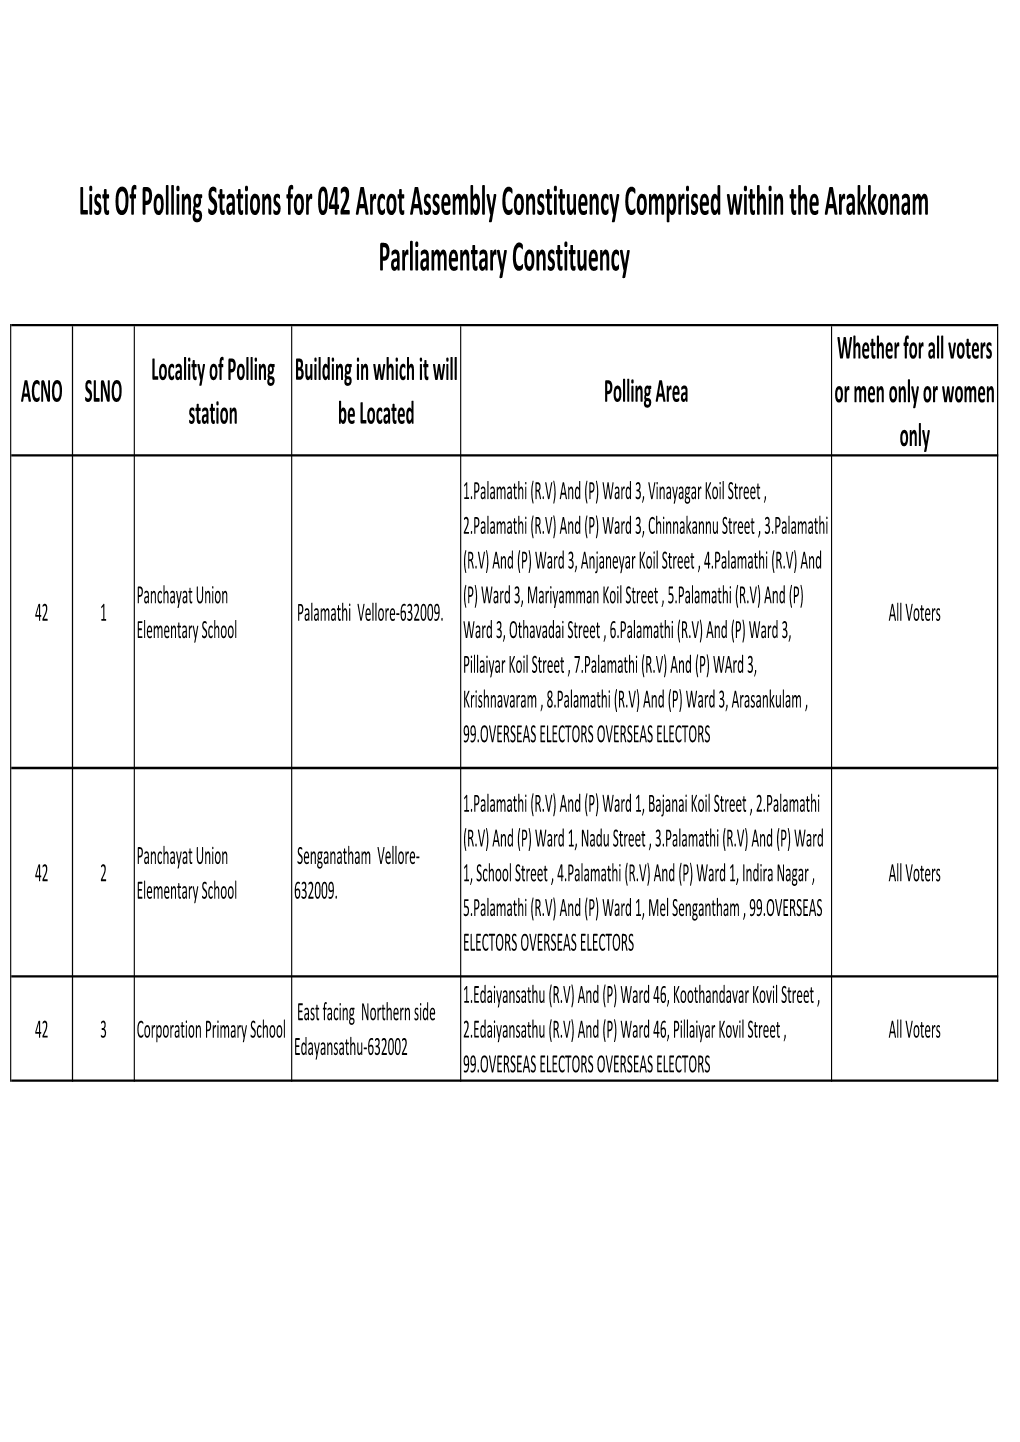 List of Polling Stations for 042 Arcot Assembly Constituency Comprised Within the Arakkonam Parliamentary Constituency